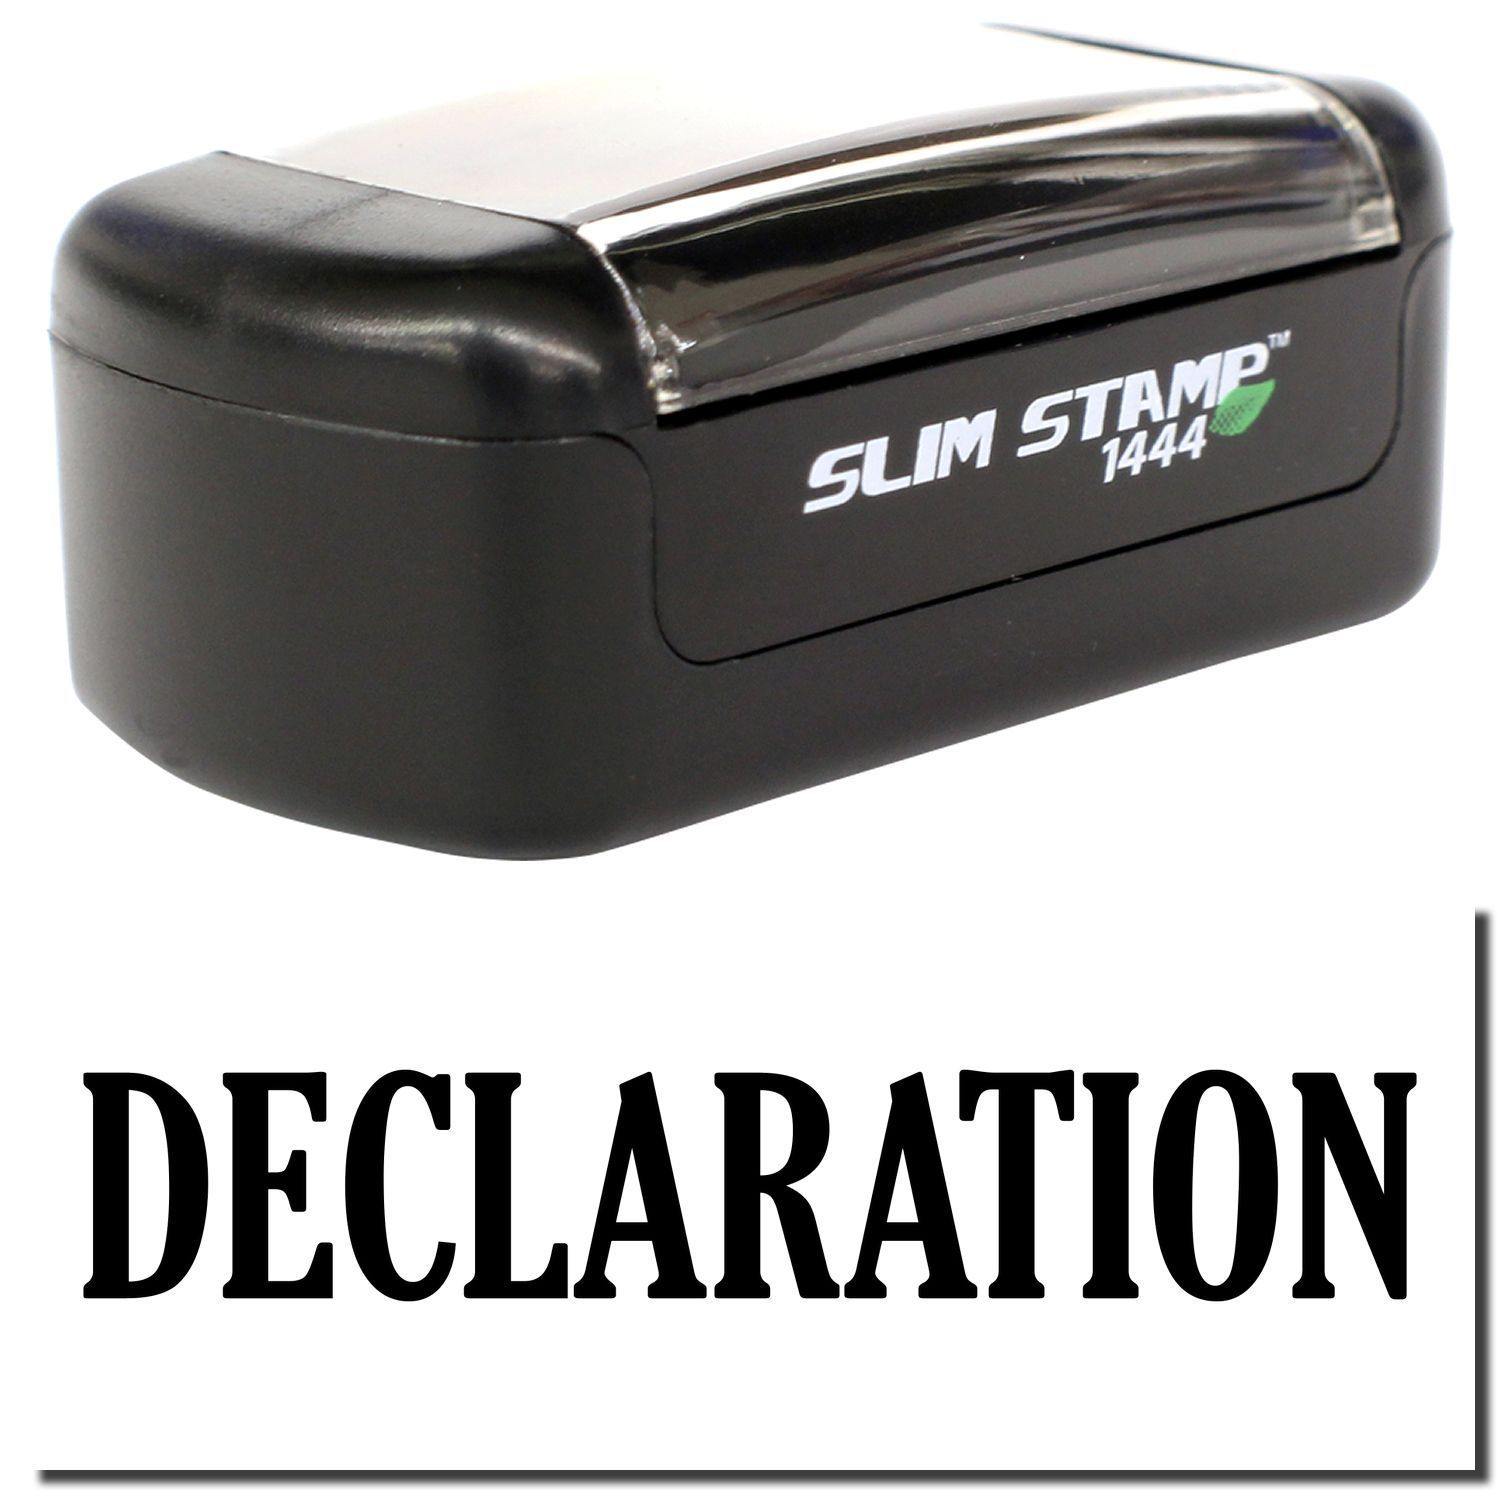 A stock office pre-inked stamp with a stamped image showing how the text "DECLARATION" is displayed after stamping.